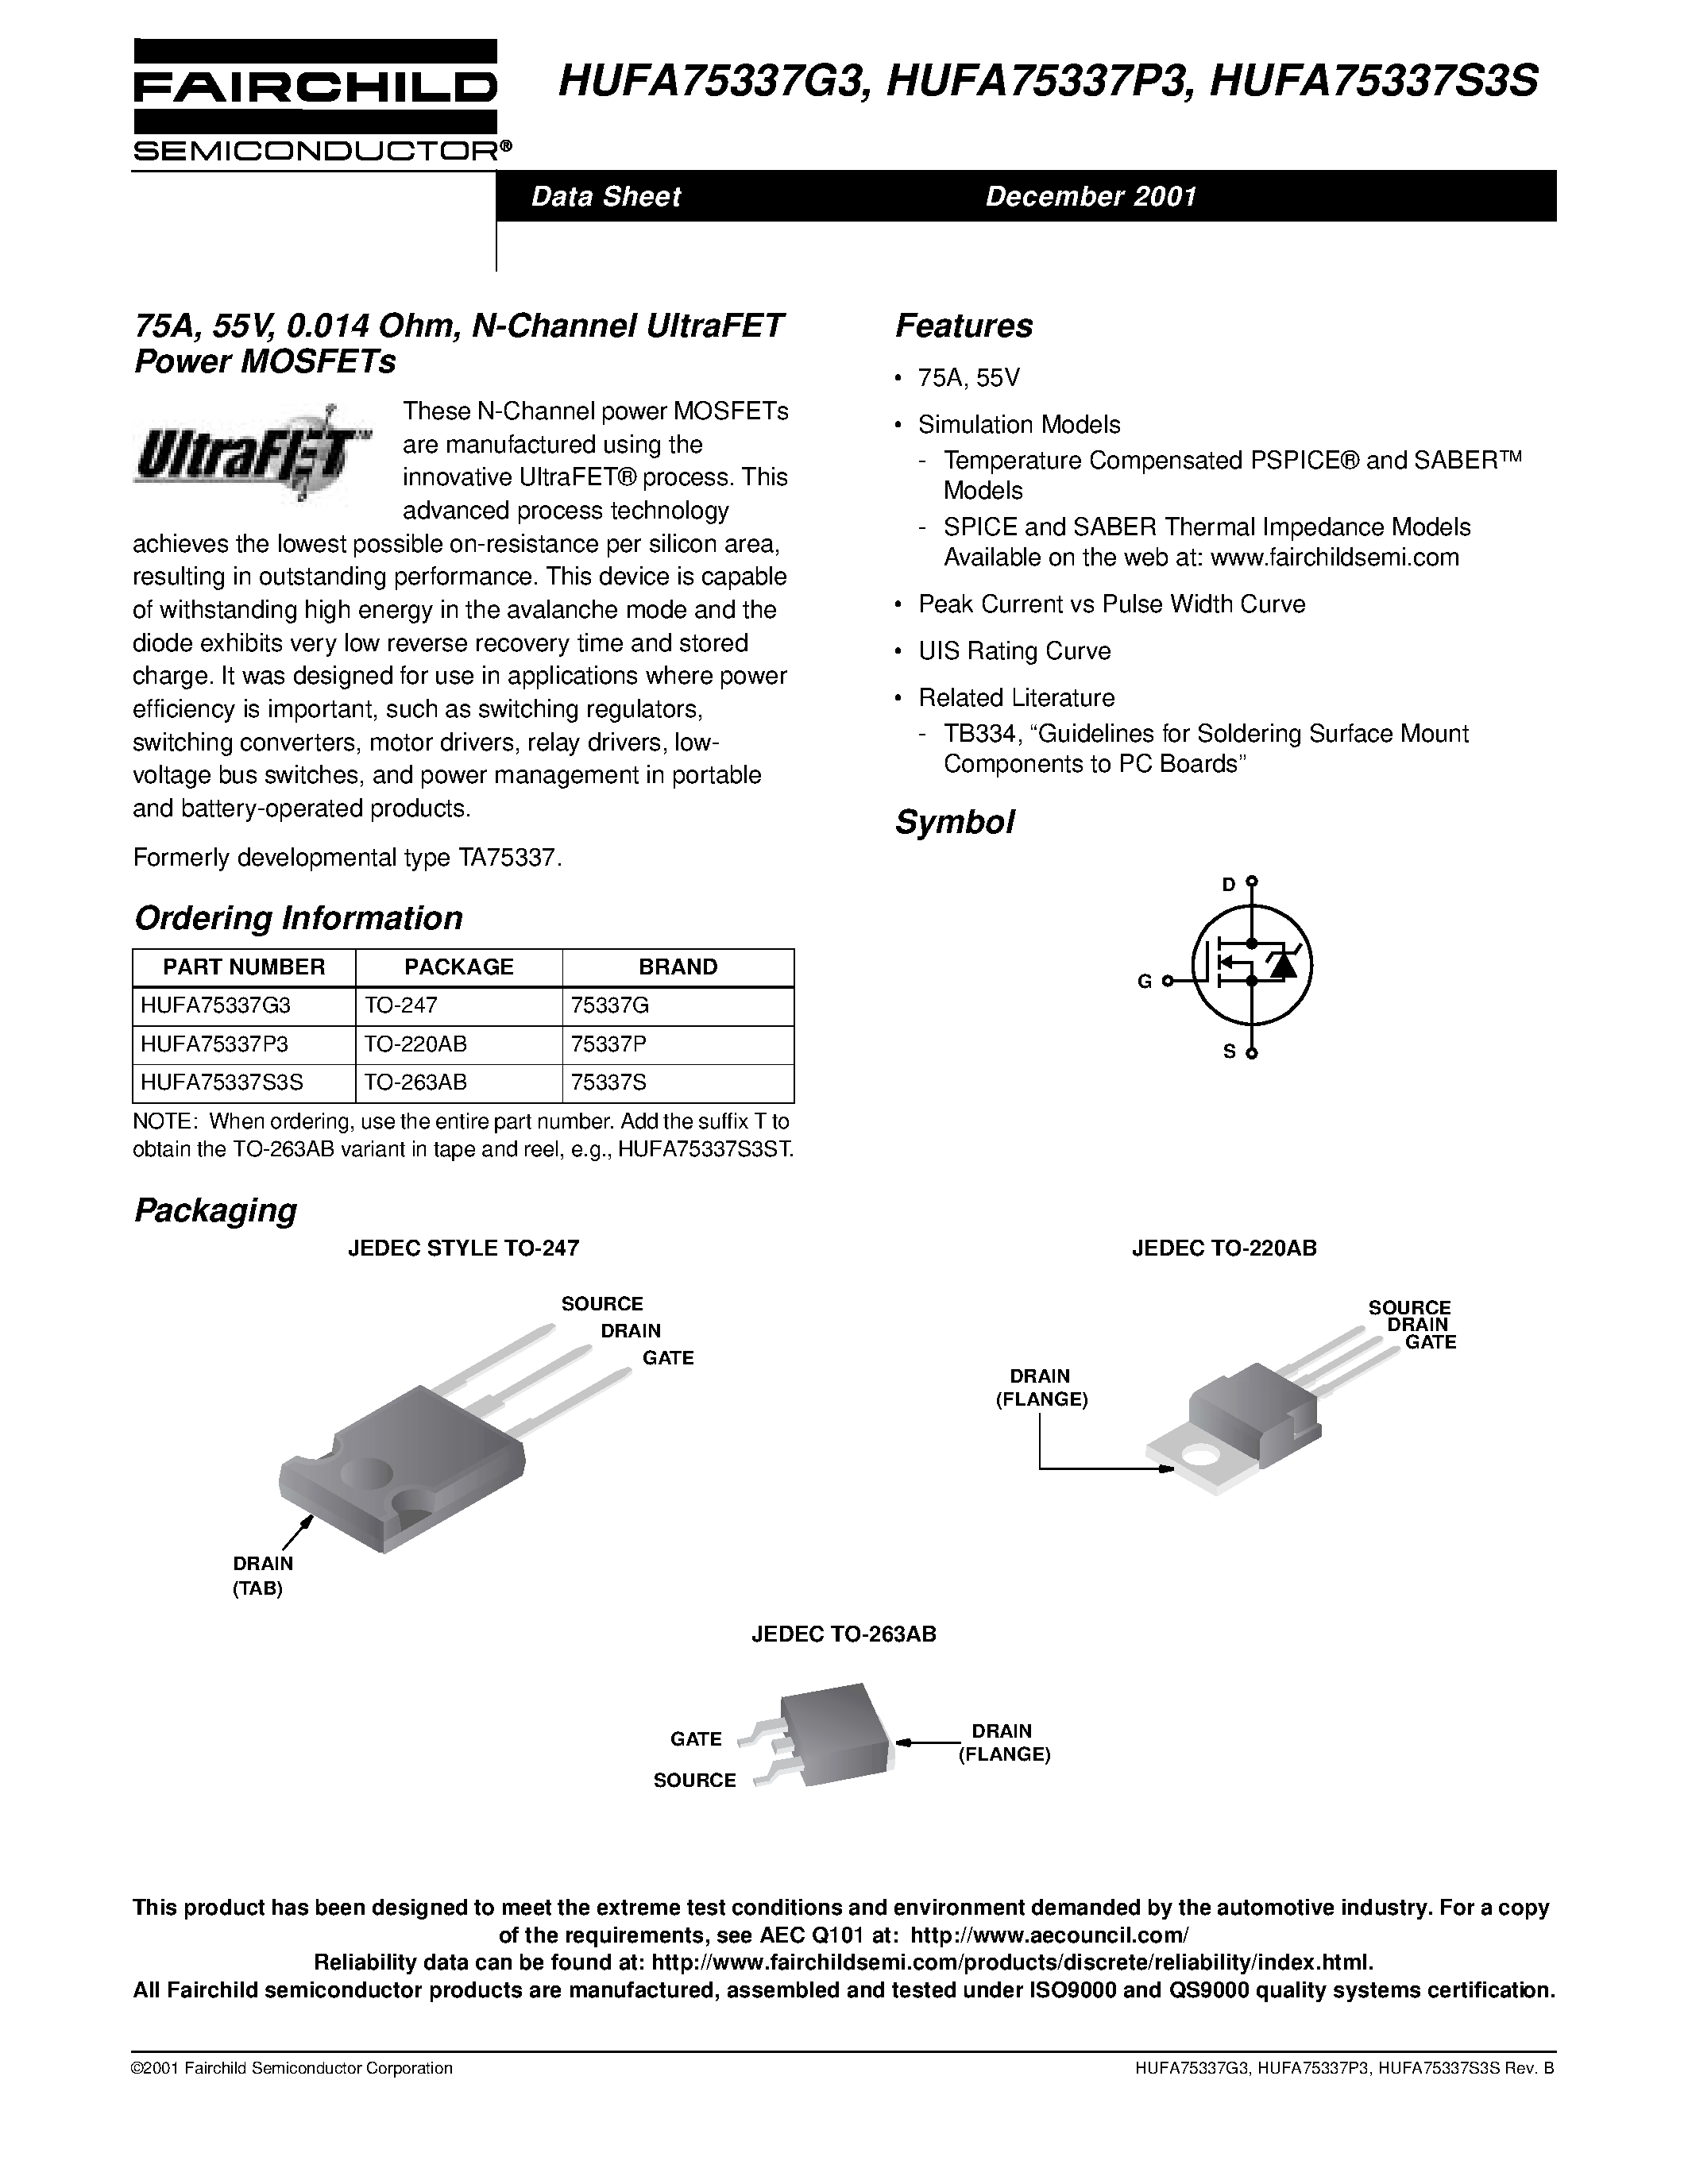 Datasheet HUFA75332P3 - 60A/ 55V/ 0.019 Ohm/ N-Channel UltraFET Power MOSFETs page 1